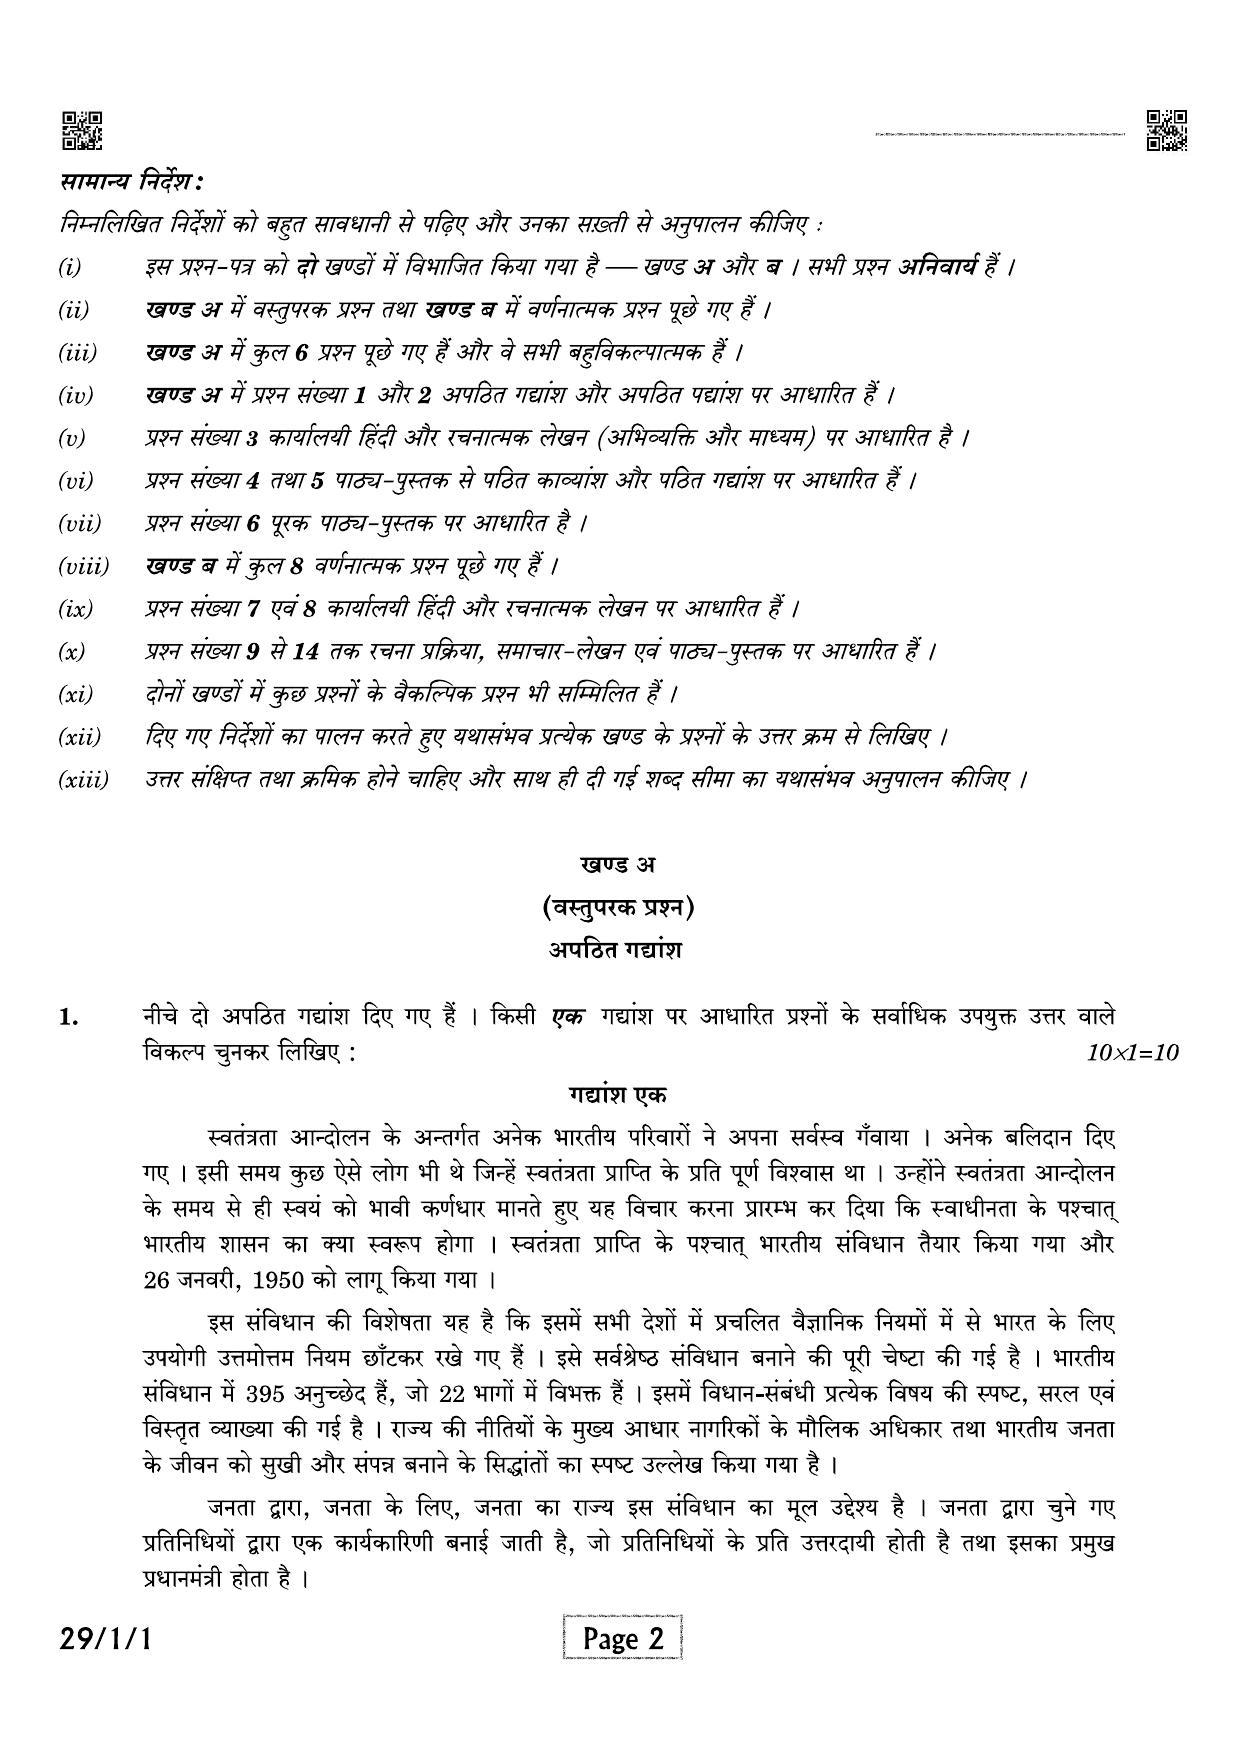 CBSE Class 12 QP_002_HINDI_ELECTIVE 2021 Compartment Question Paper - Page 2